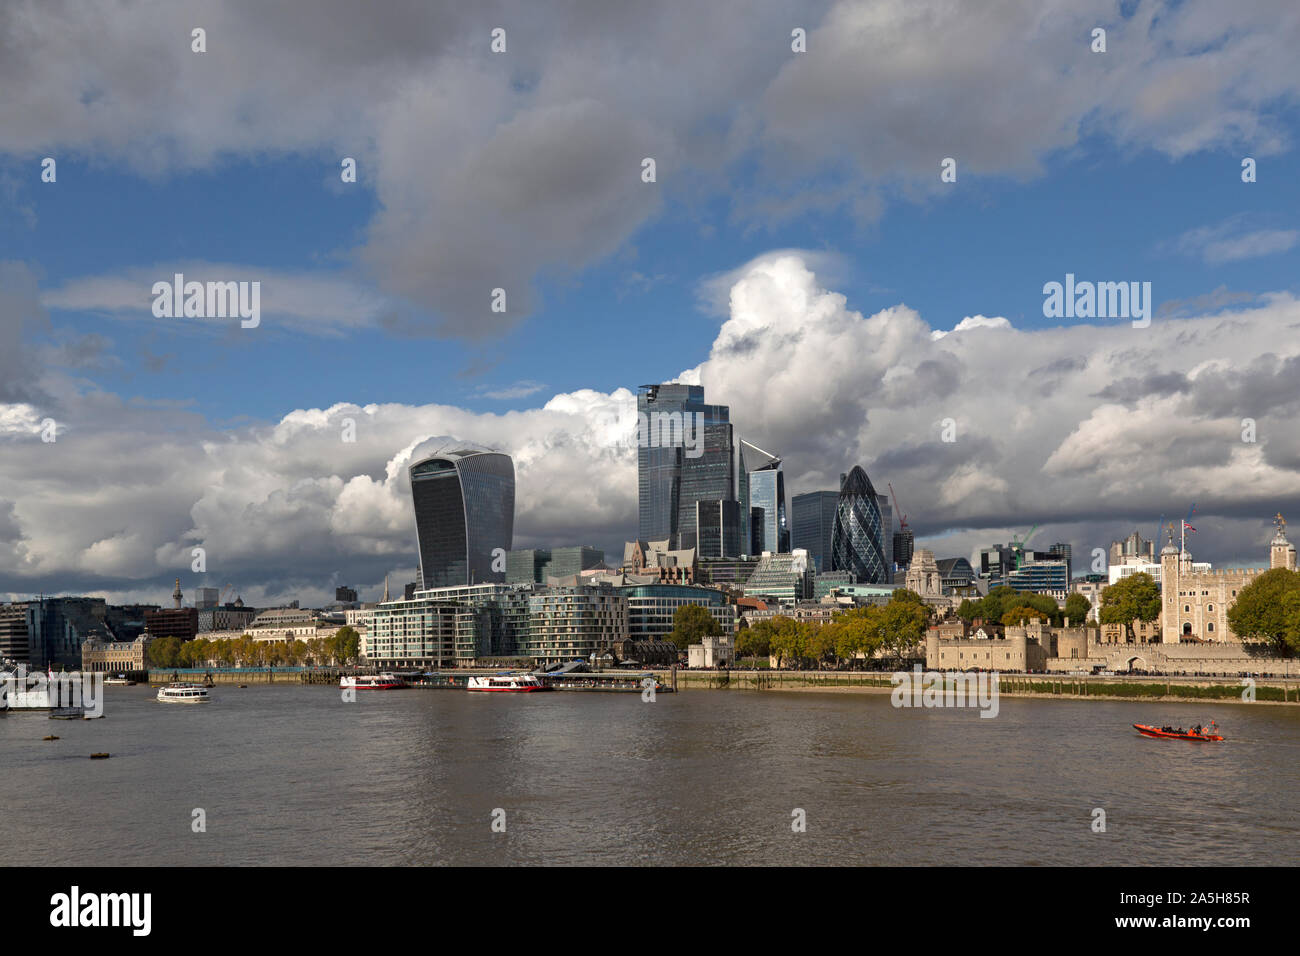 View across the River Thames in London, the Tower Of London on the right, and the modern skyline, with the Walkie Talkie building in the background. Stock Photo